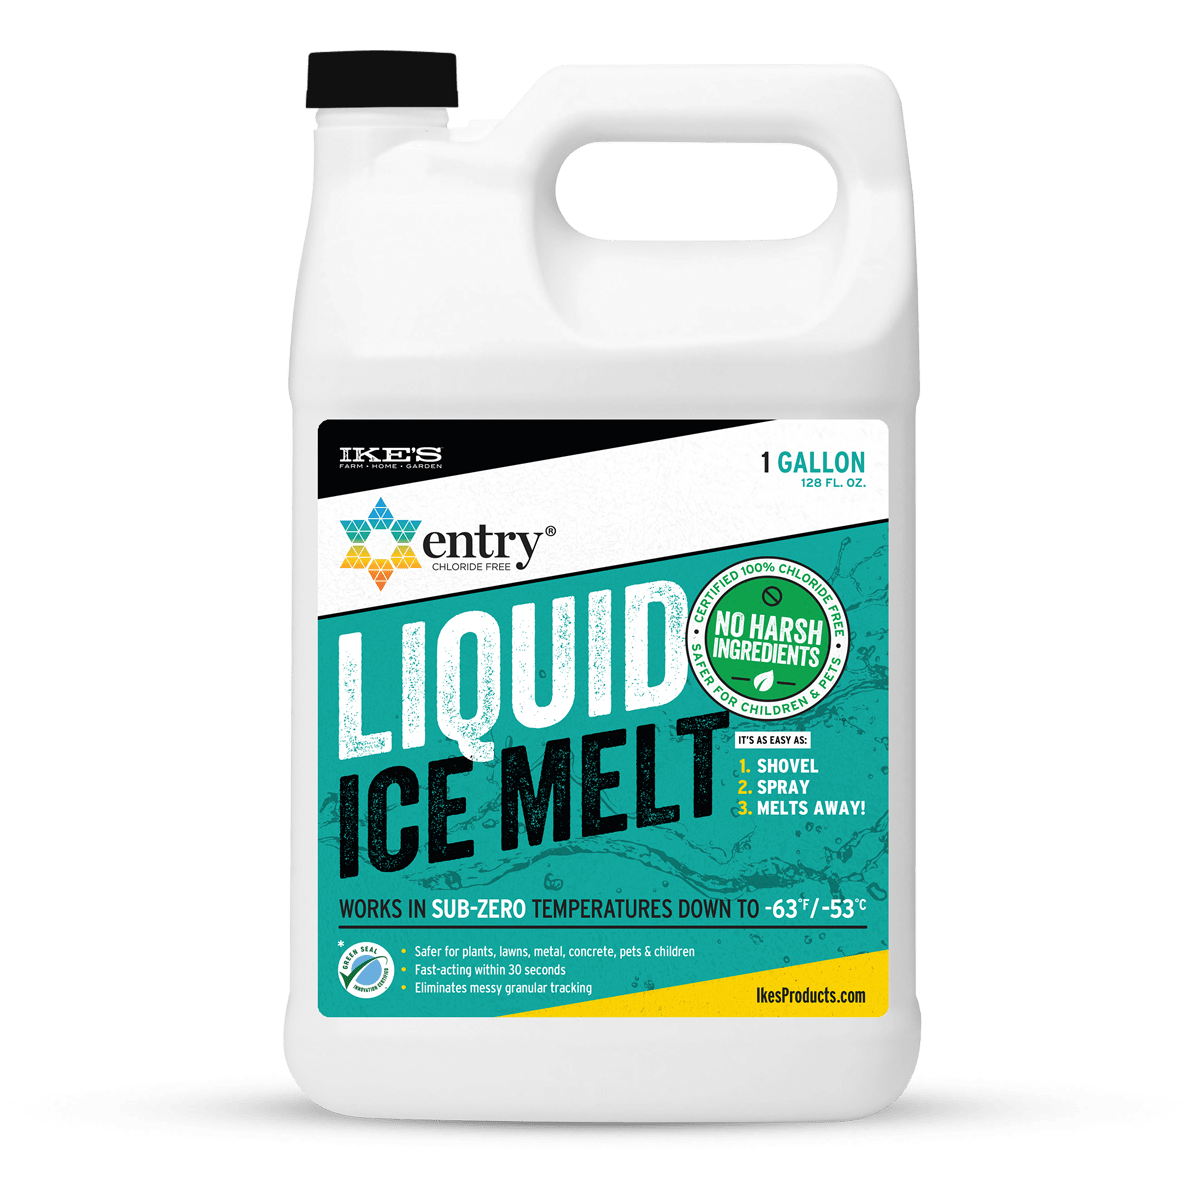 1 gallon container of IKE'S Liquid Ice Melt